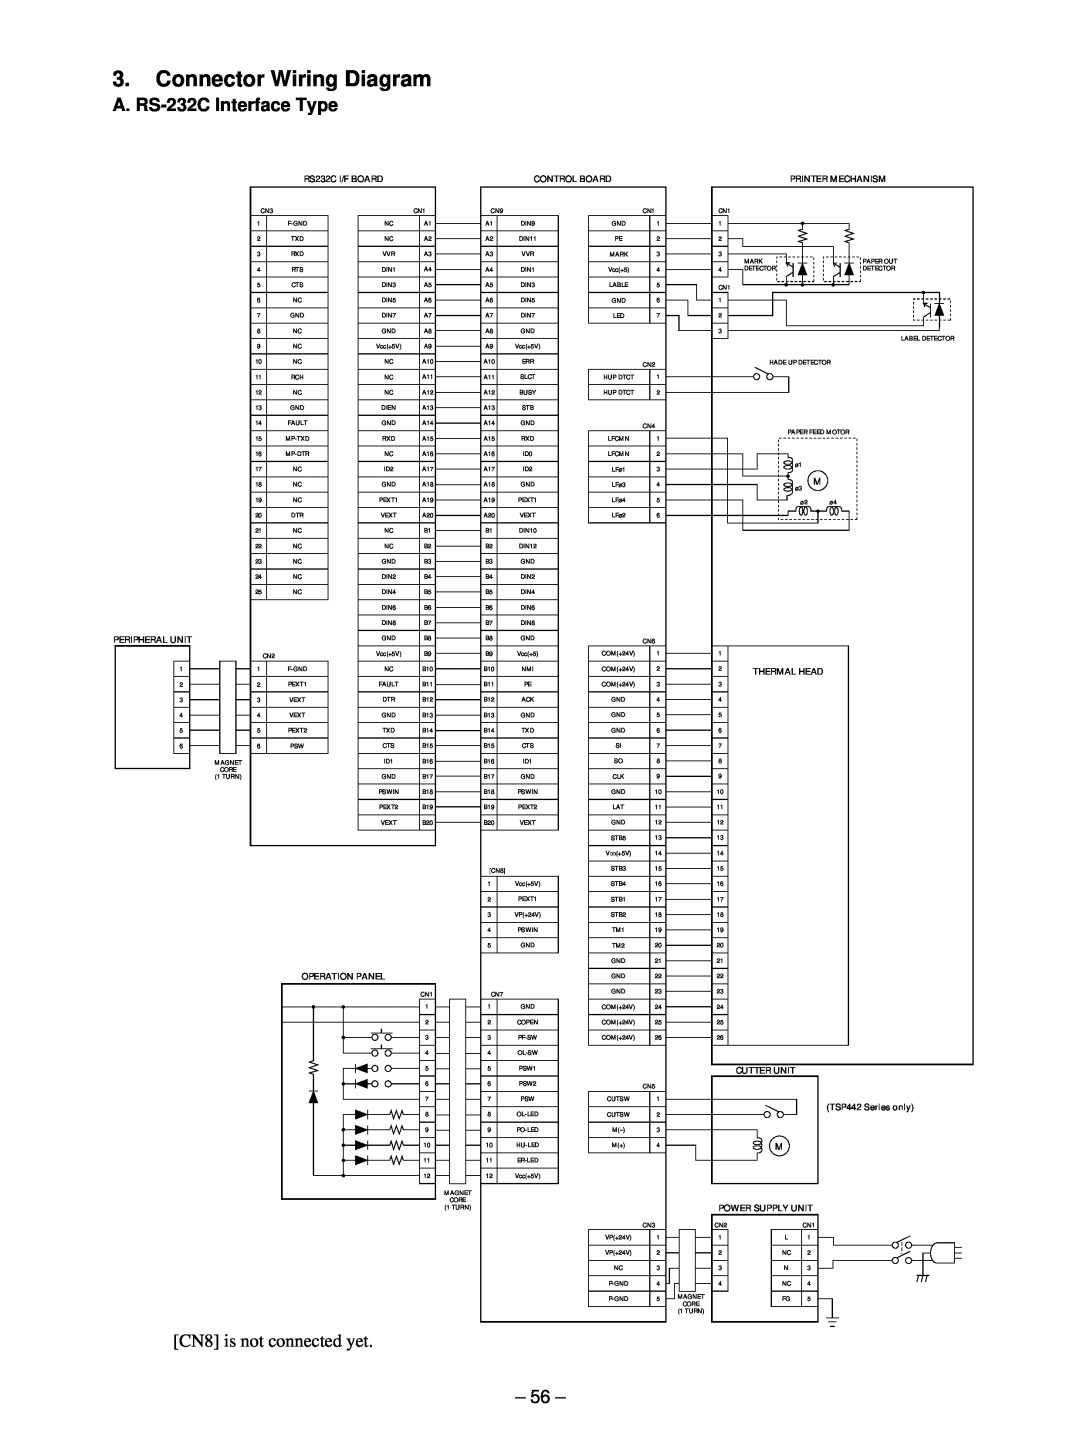 Star Micronics TSP400 Connector Wiring Diagram, RS232C I/F BOARD, Control Board, Peripheral Unit, Operation Panel 